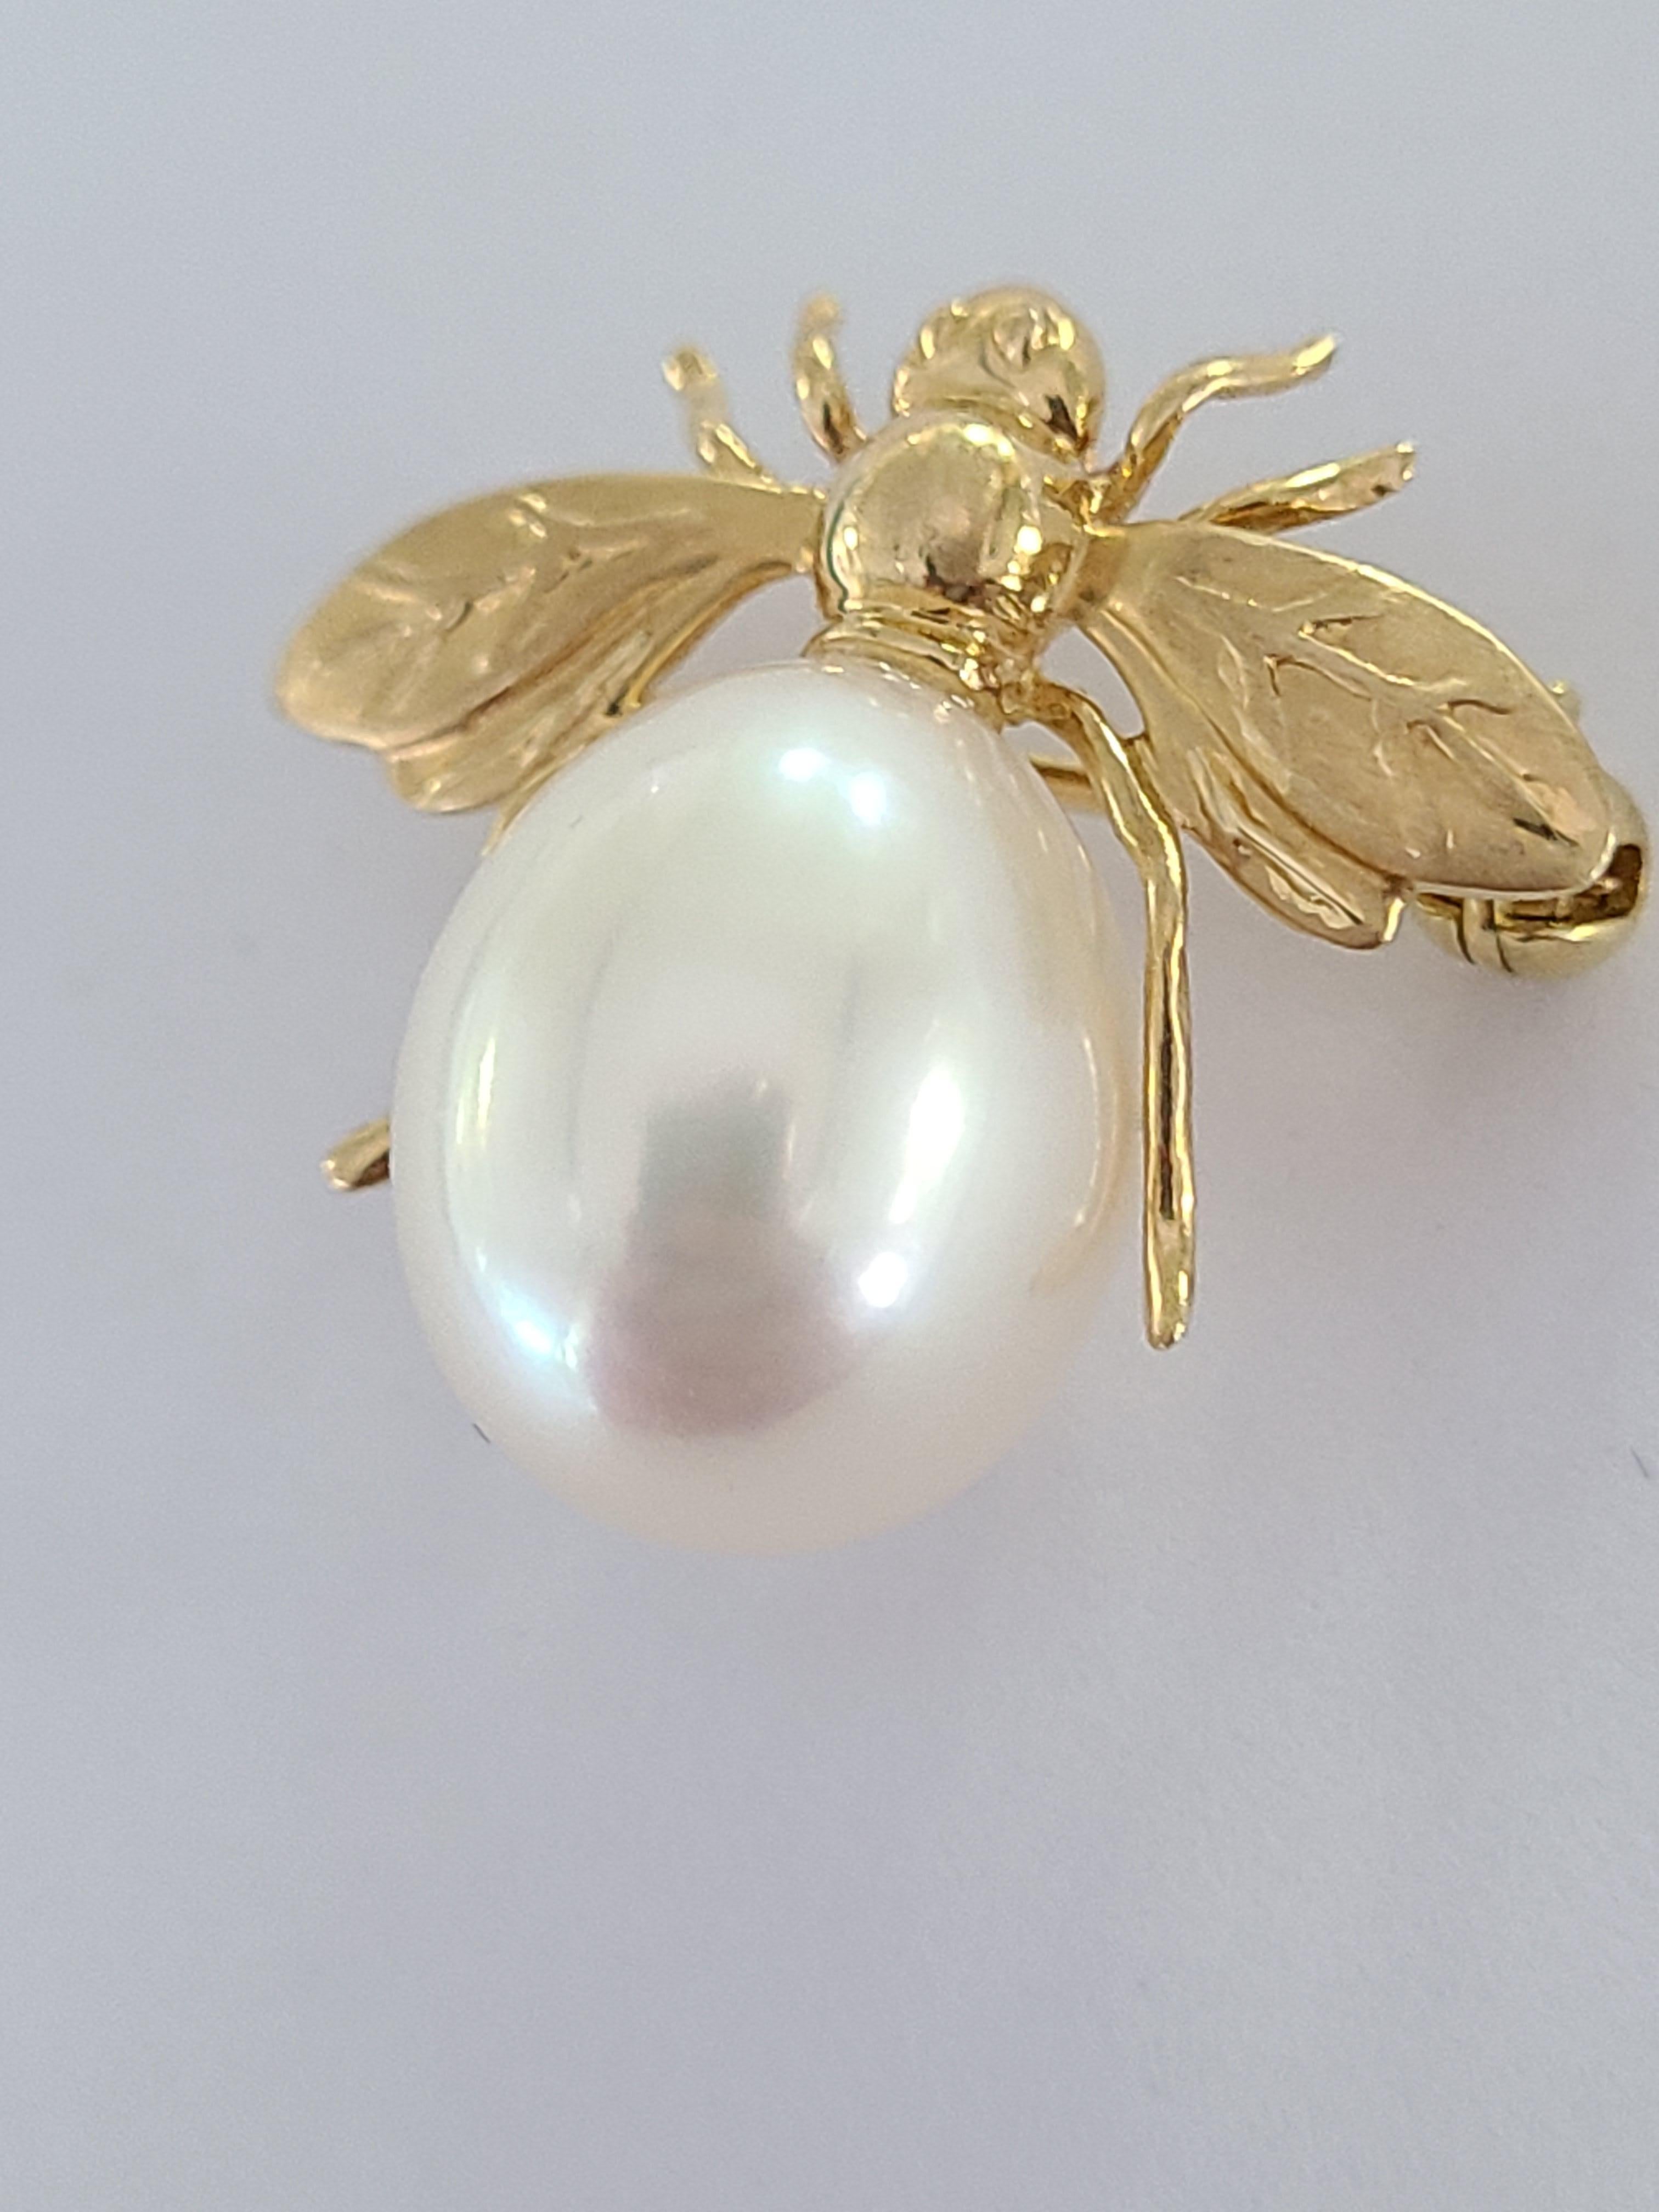 A gorgeous pendant come brooch in 18k gold with beautiful craftsmanship . The pearl is freshwater and weight is 9.9 carats. Brooch dimensions in cm 3 x 3 x 1 .